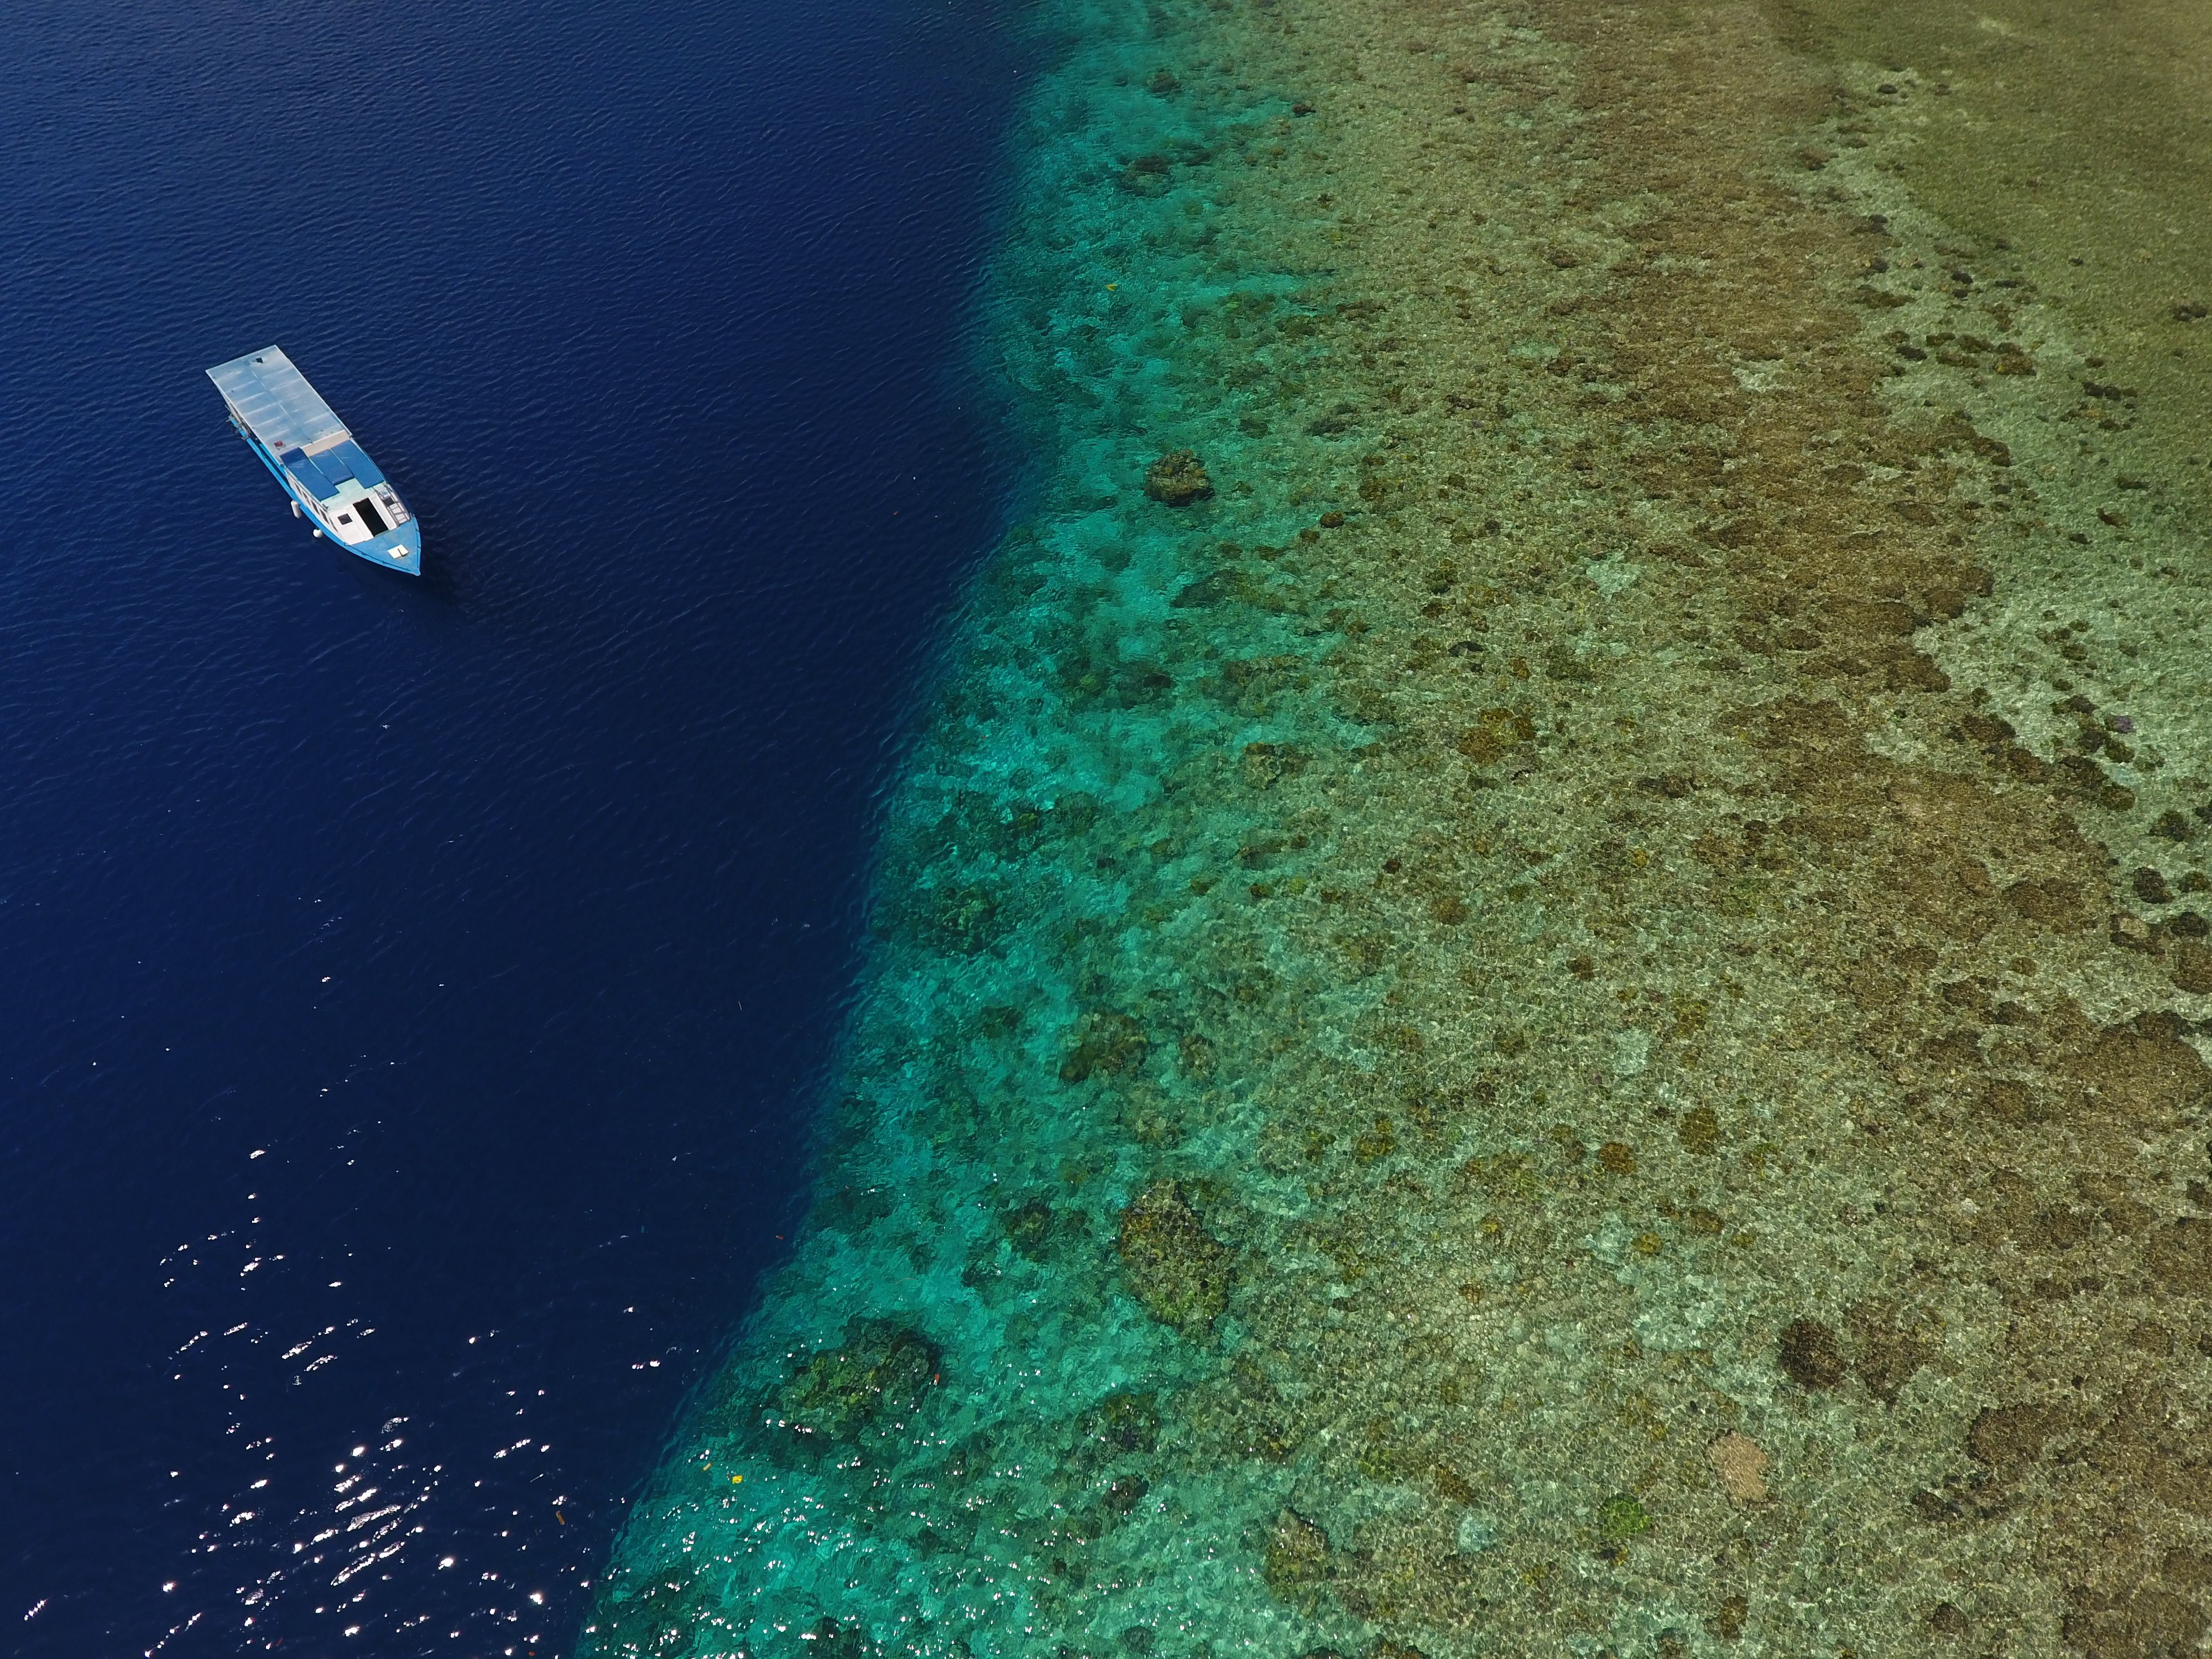 Scuba diving boat next to coral reef on tropical sea in Manado Indonesia.